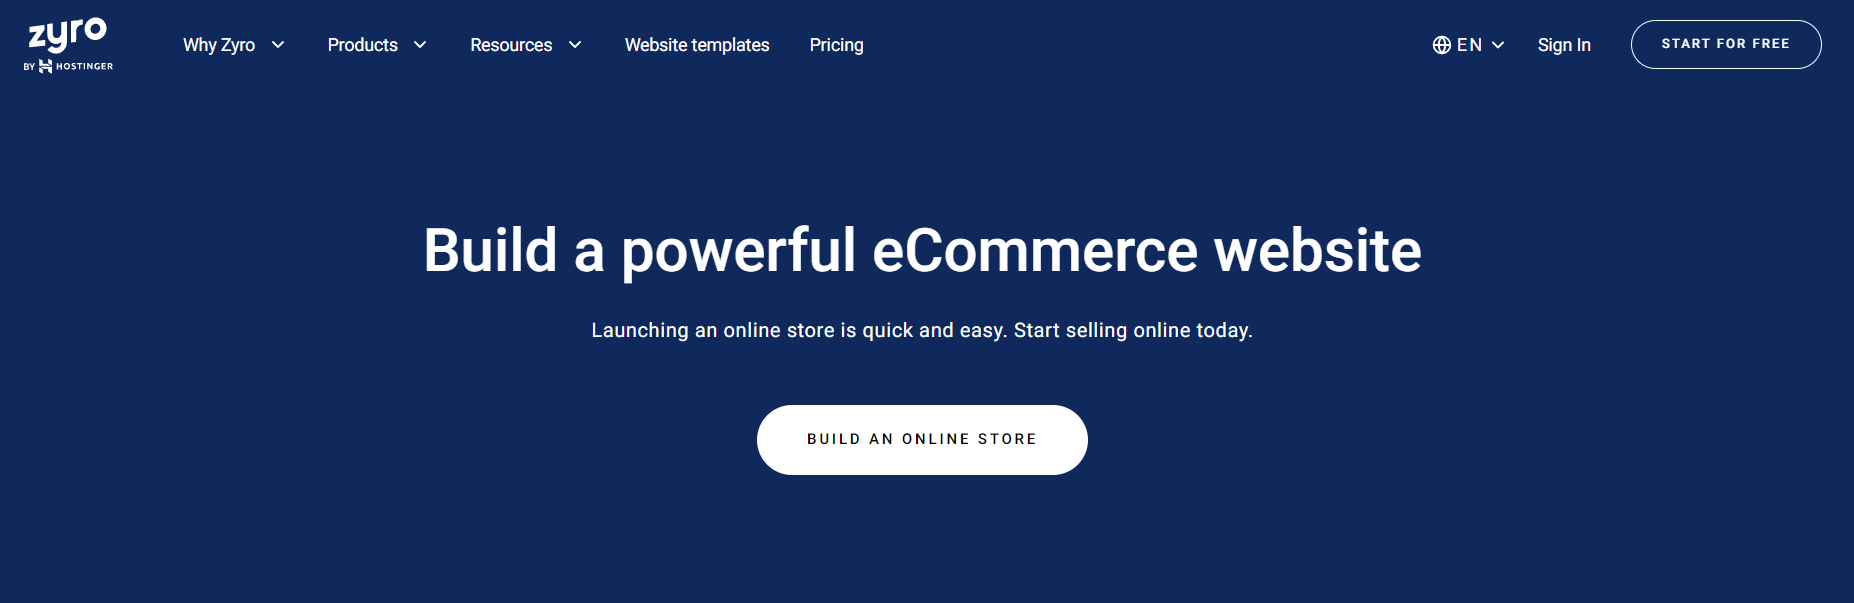 Zyro is one of the cheapest eCommerce platforms out there, best suited for those looking for a low-budget store quickly